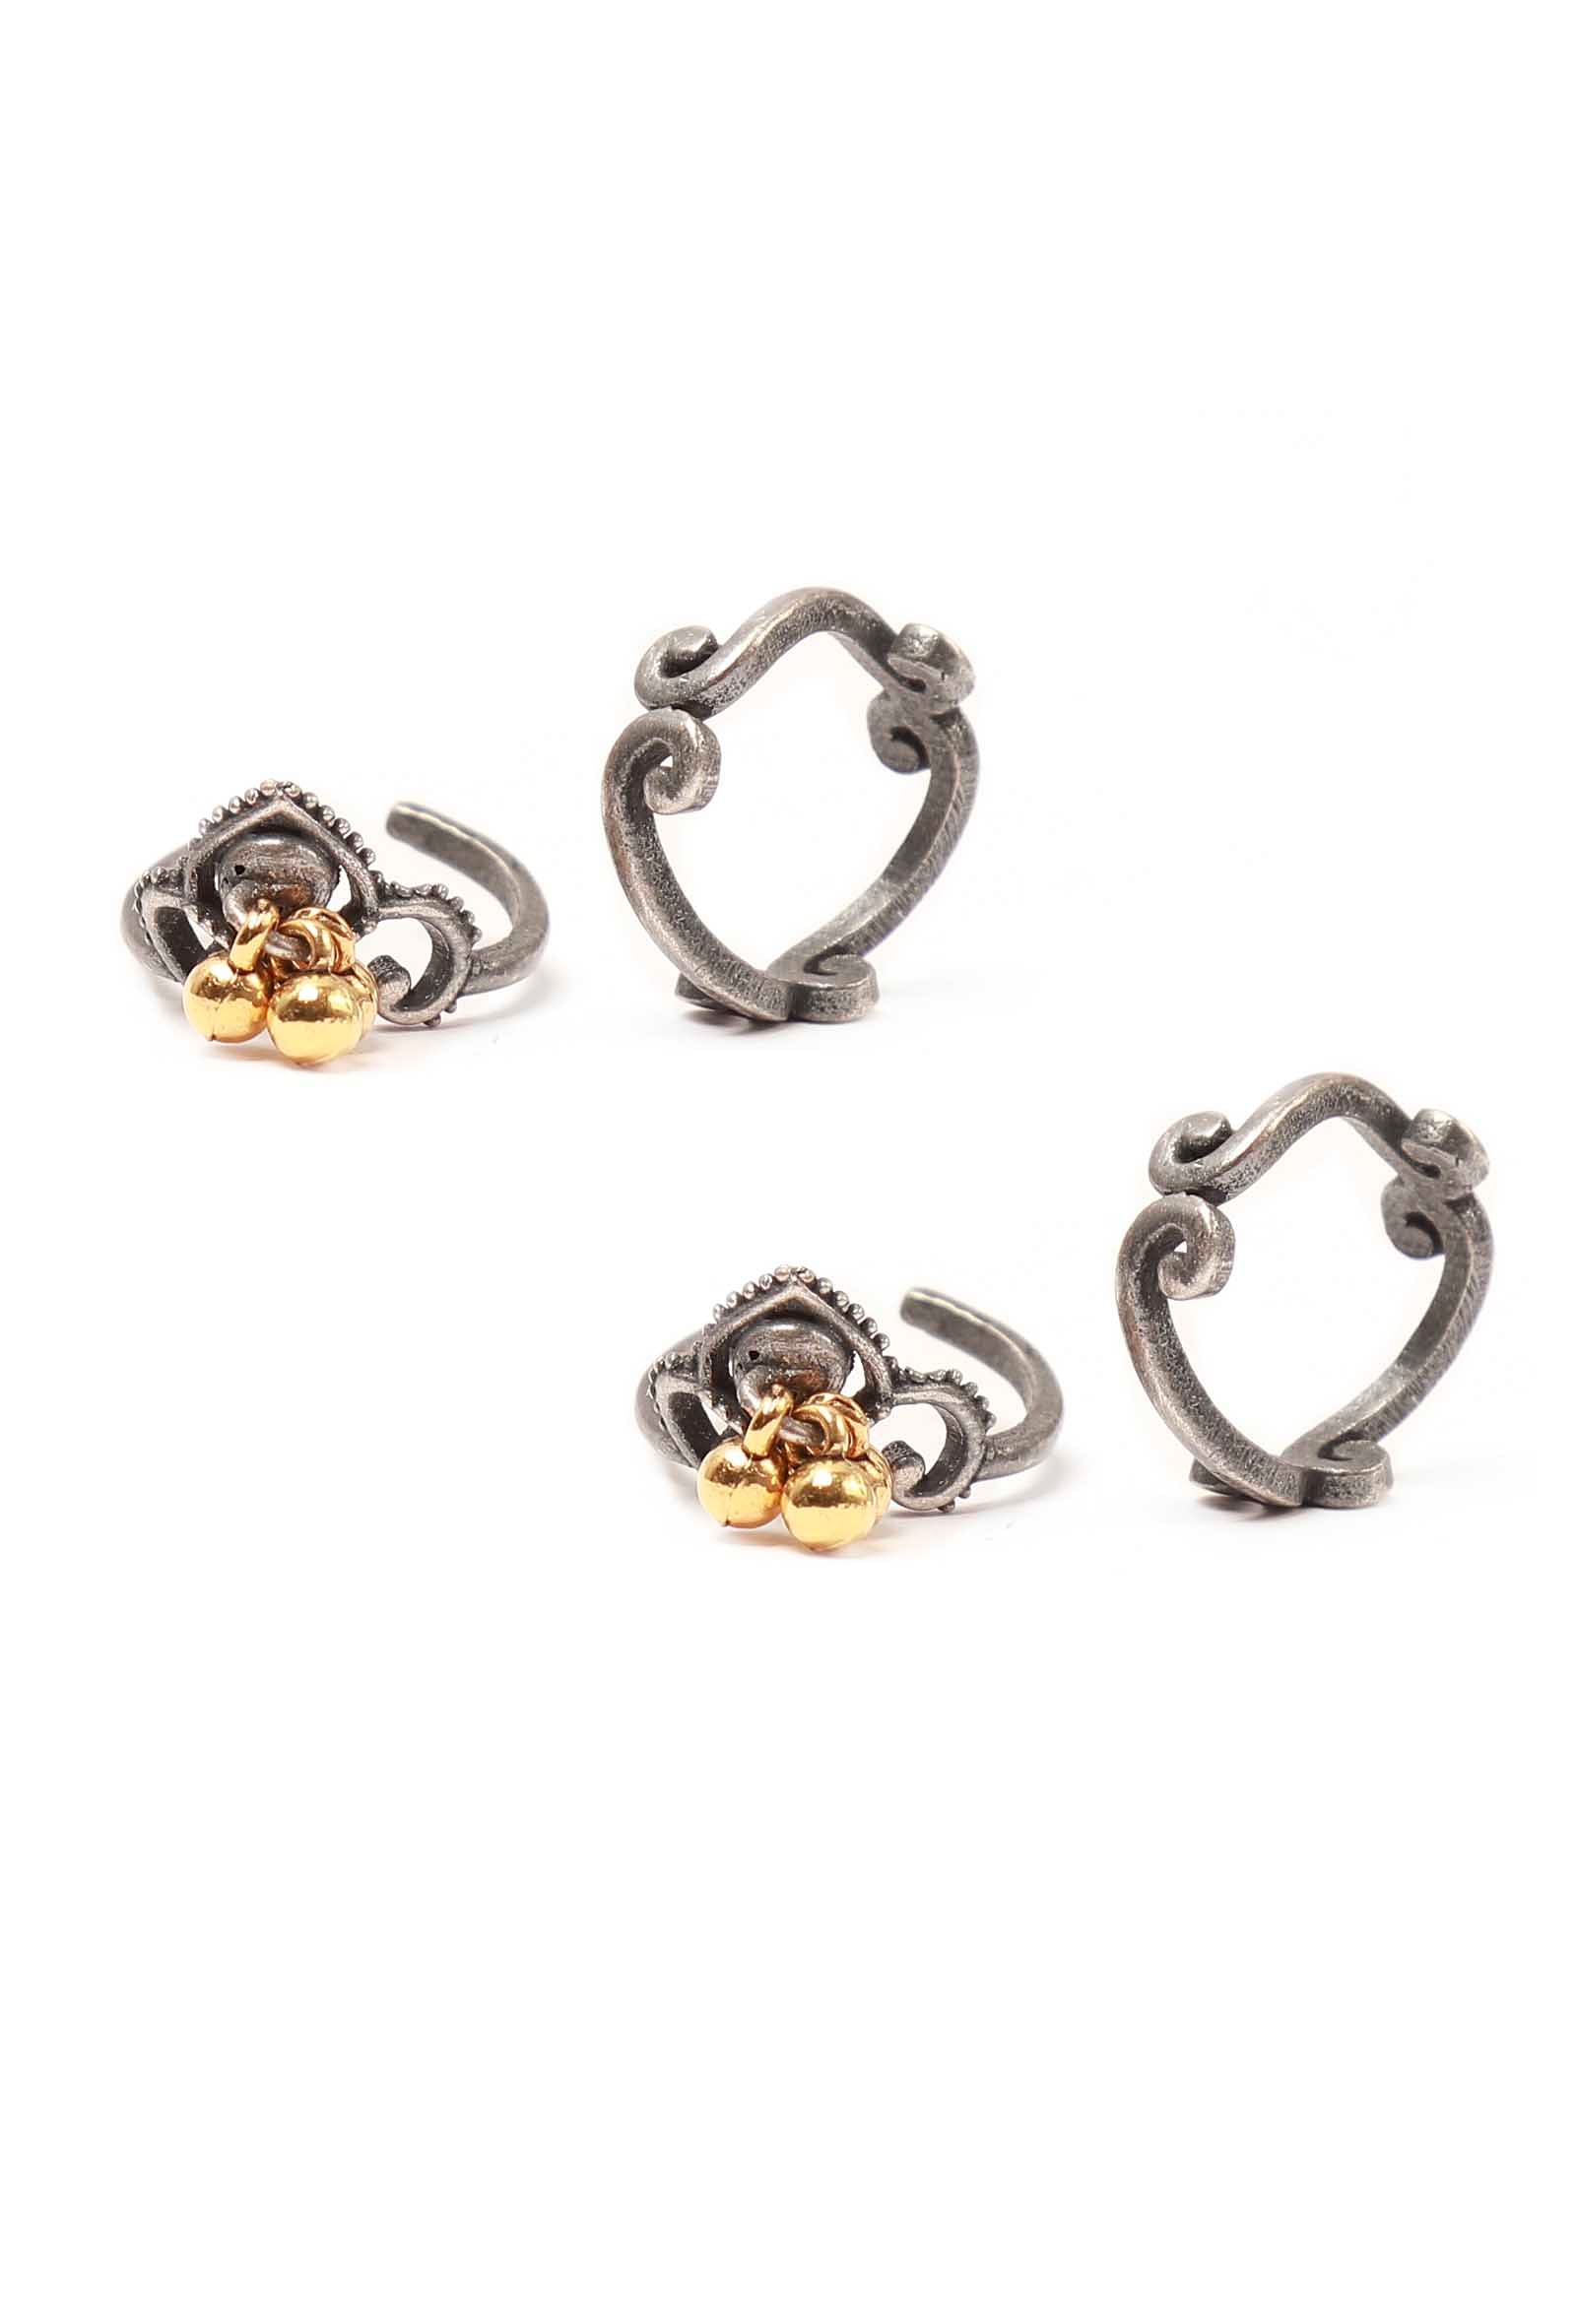 Set of 4: Floral Silver Brass Toering